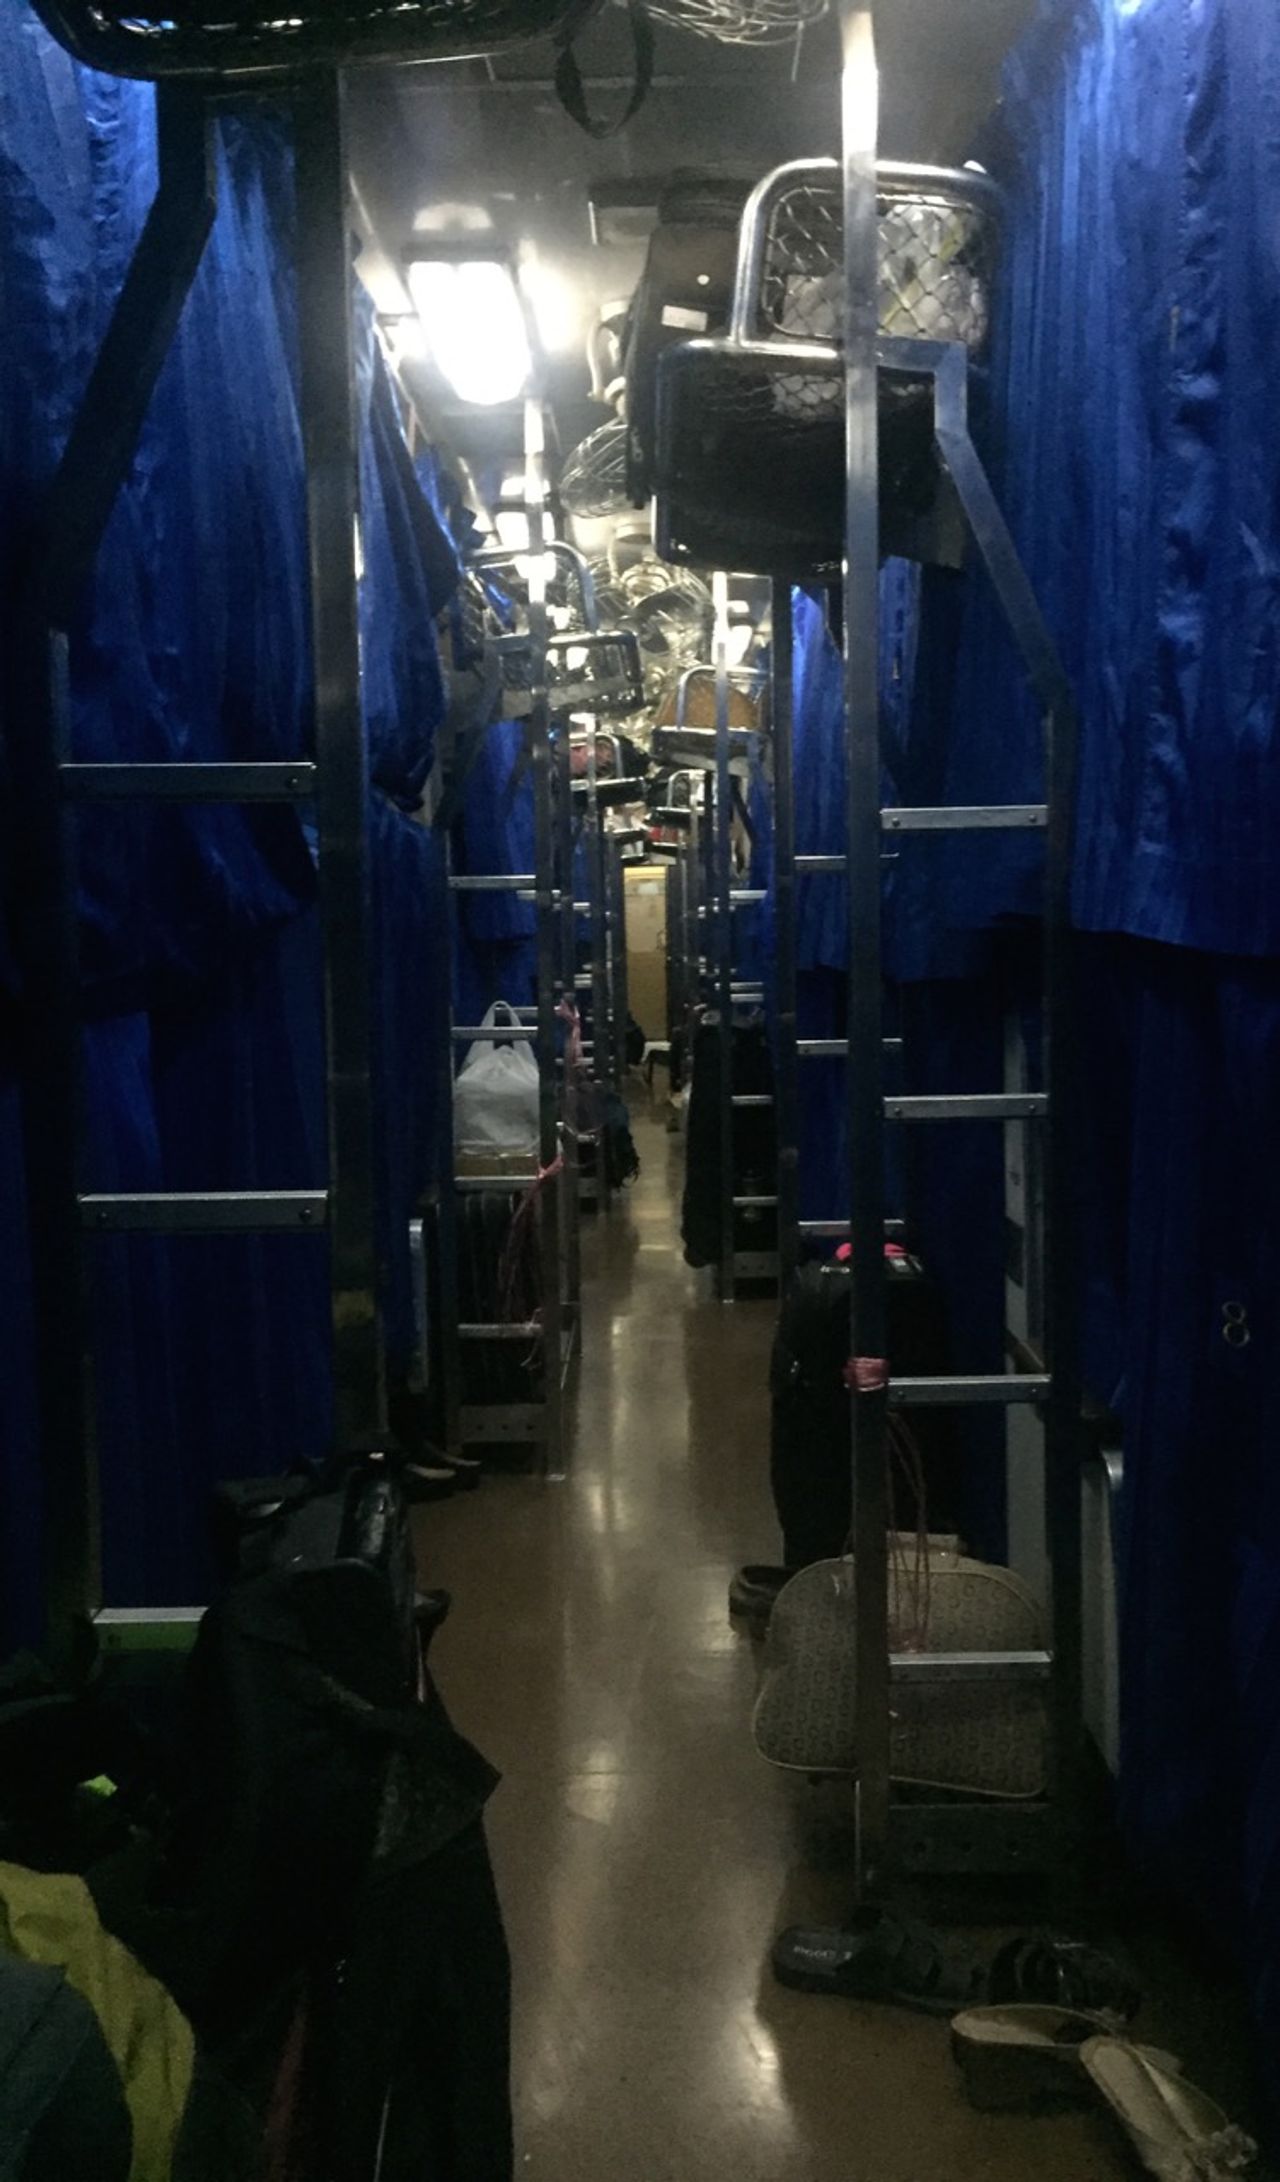 A night train car with all the bunk curtains closed